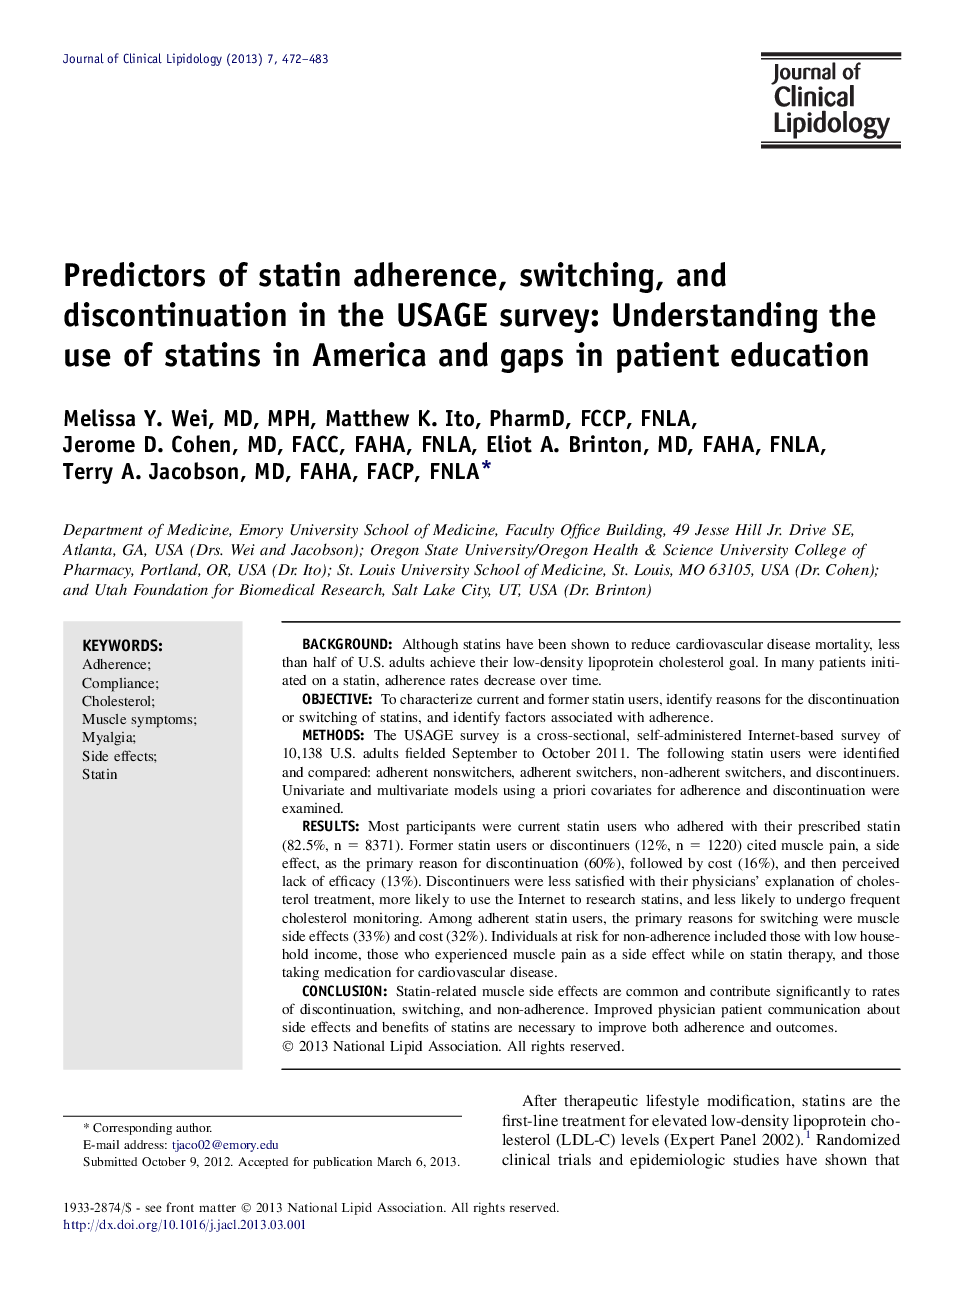 Predictors of statin adherence, switching, and discontinuation in the USAGE survey: Understanding the use of statins in America and gaps in patient education